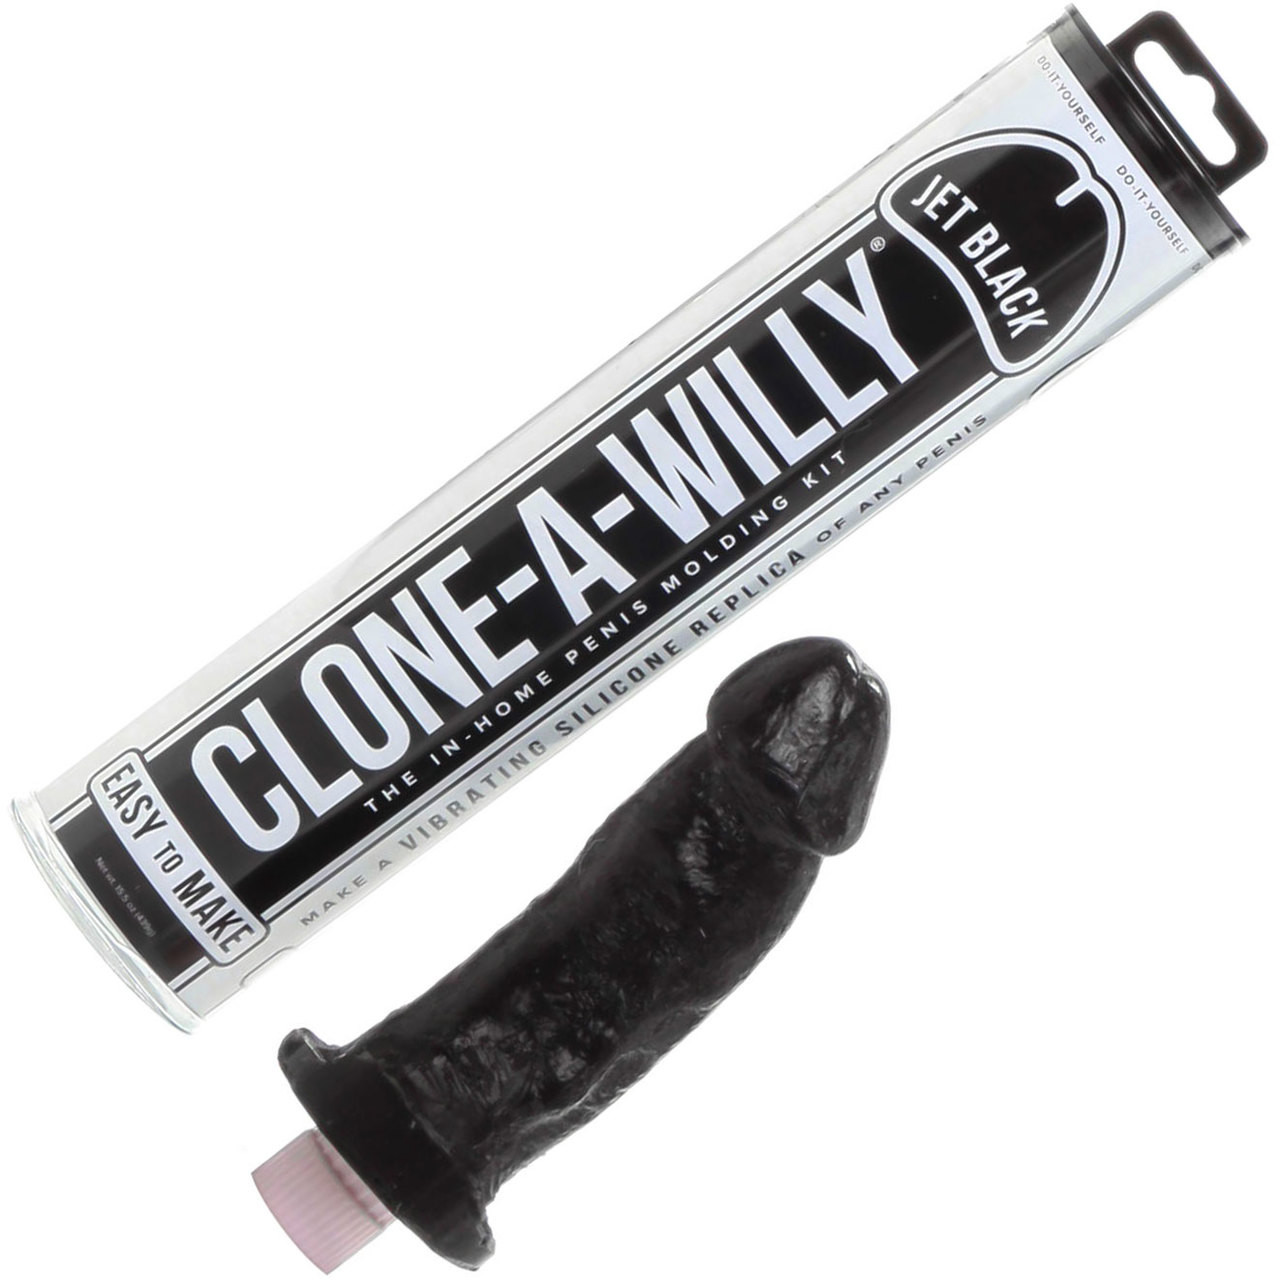 Clone-A-Willy Make Your Own Vibrating Silicone Dildo - Jet Black-4296